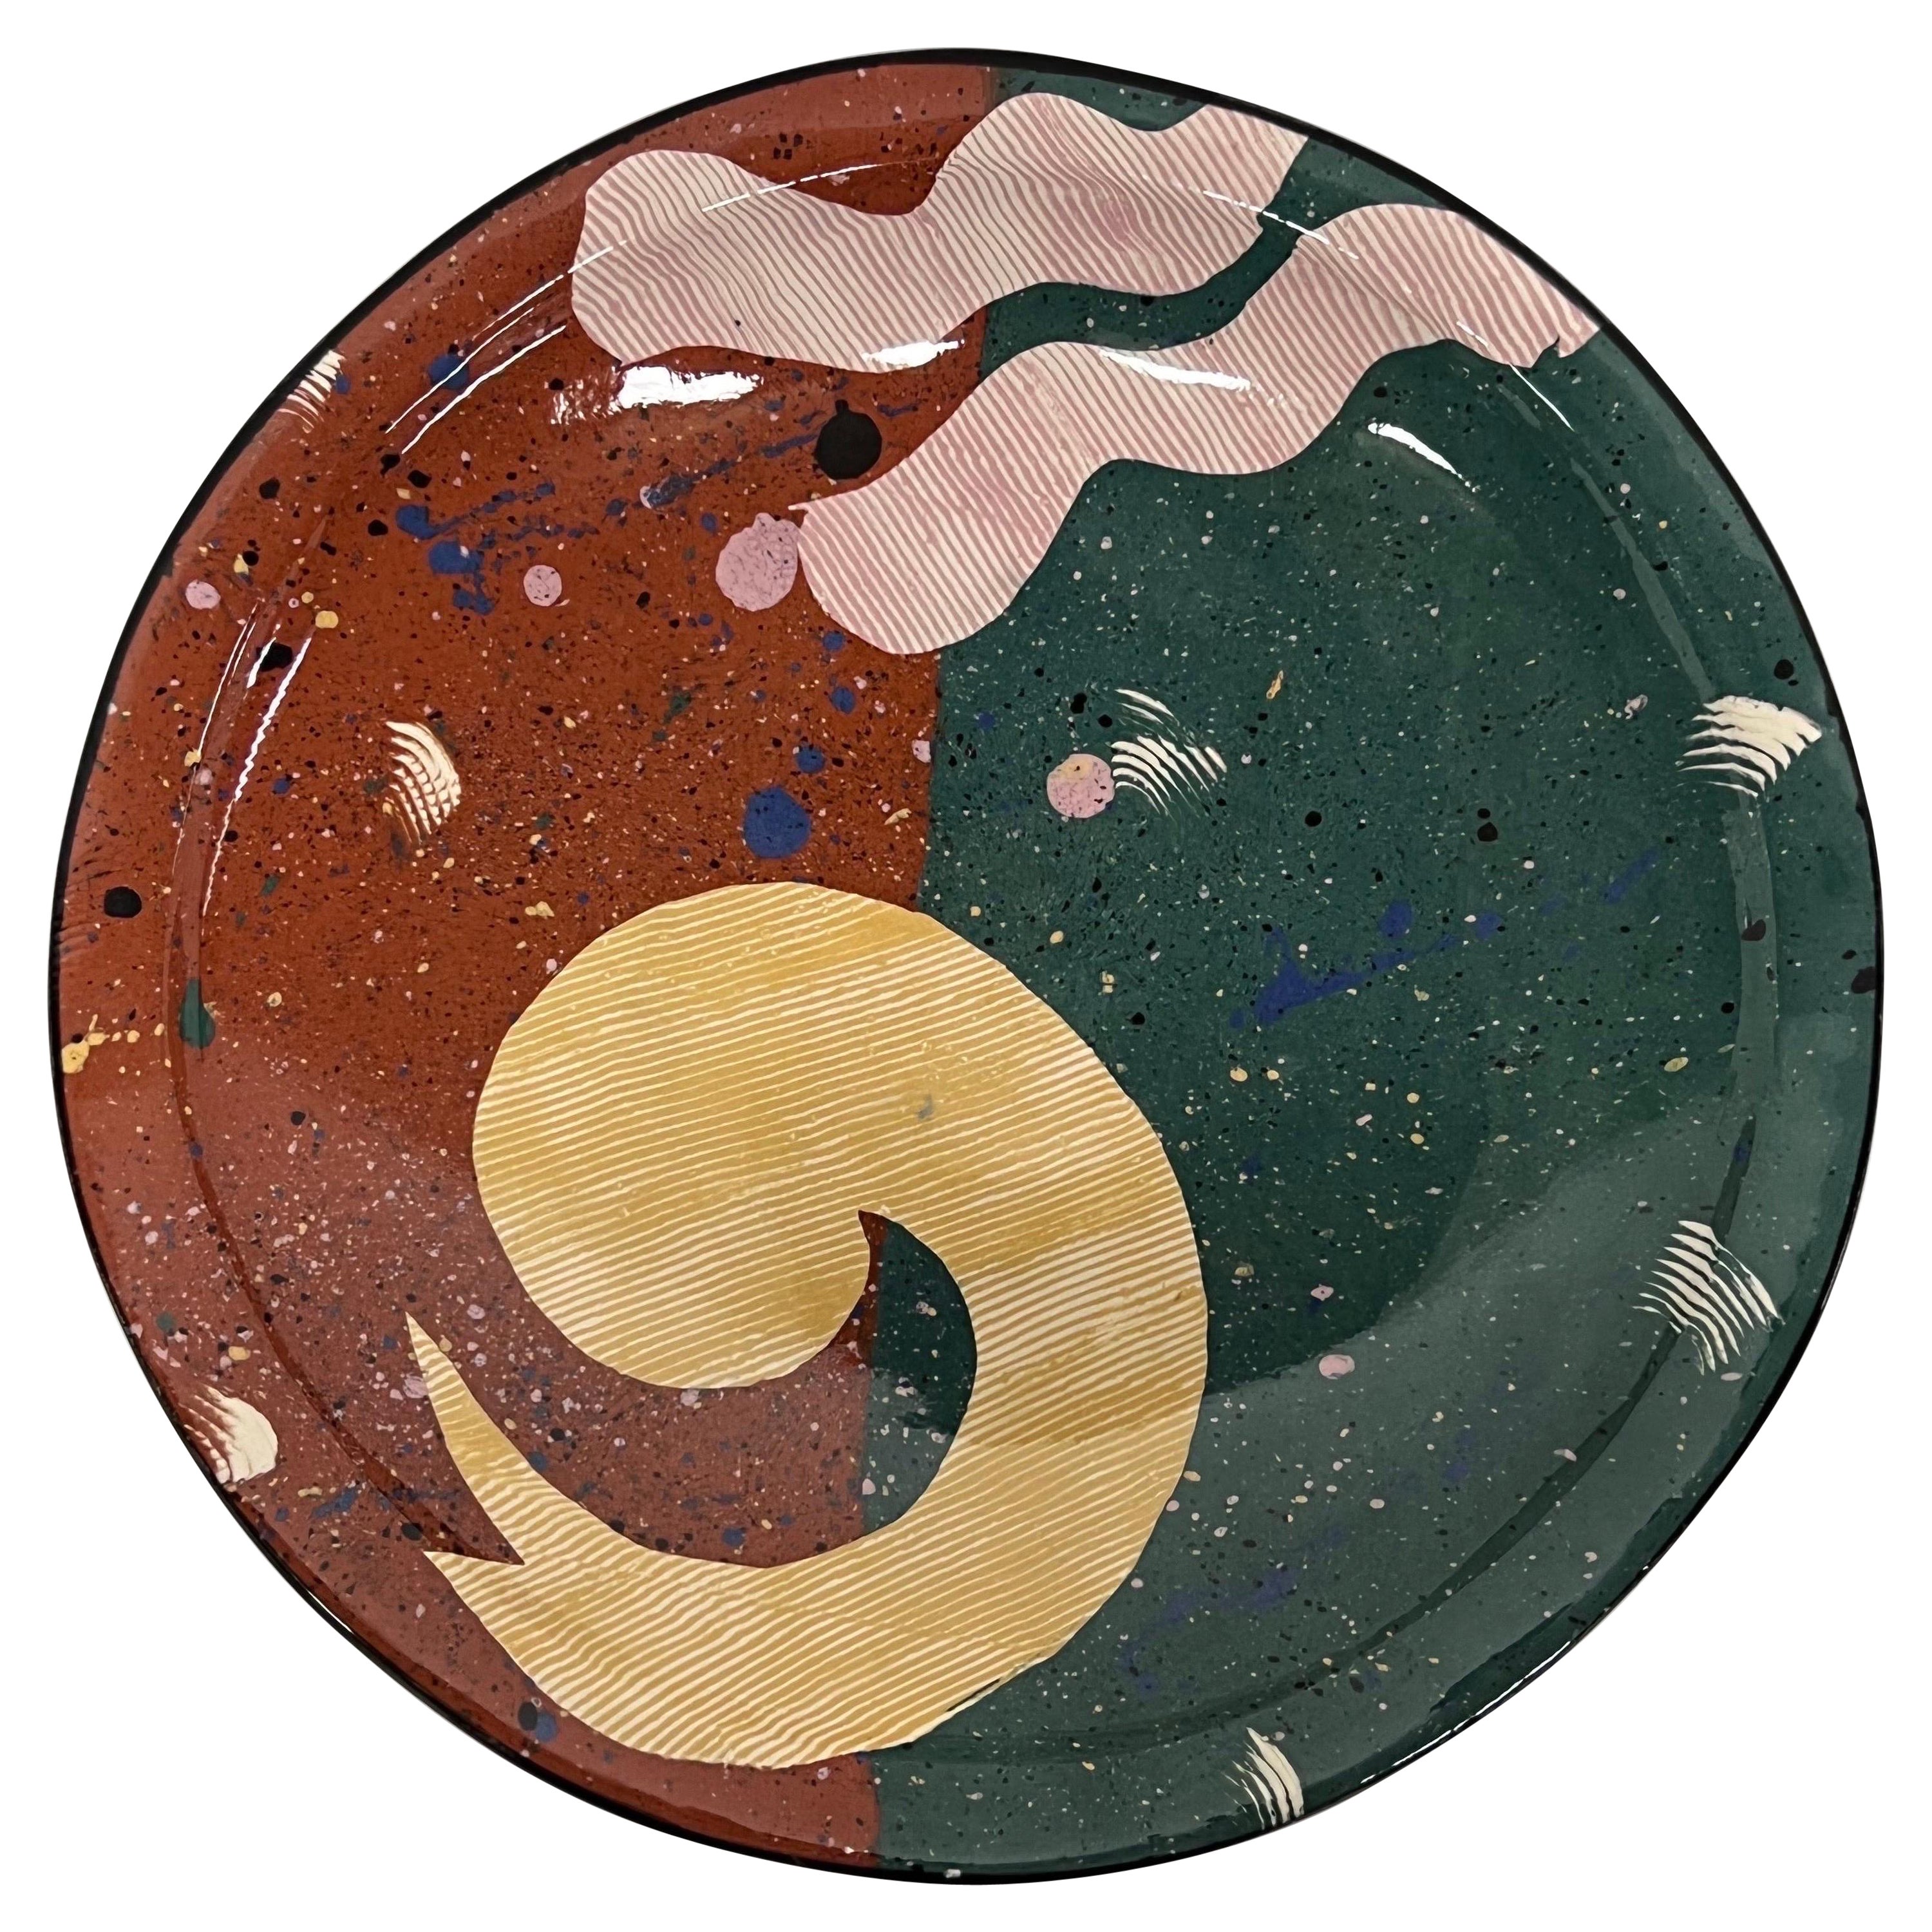 Claudia Reese Cera-Mix Studio Pottery Postmodern Art Dinner Plate For Sale